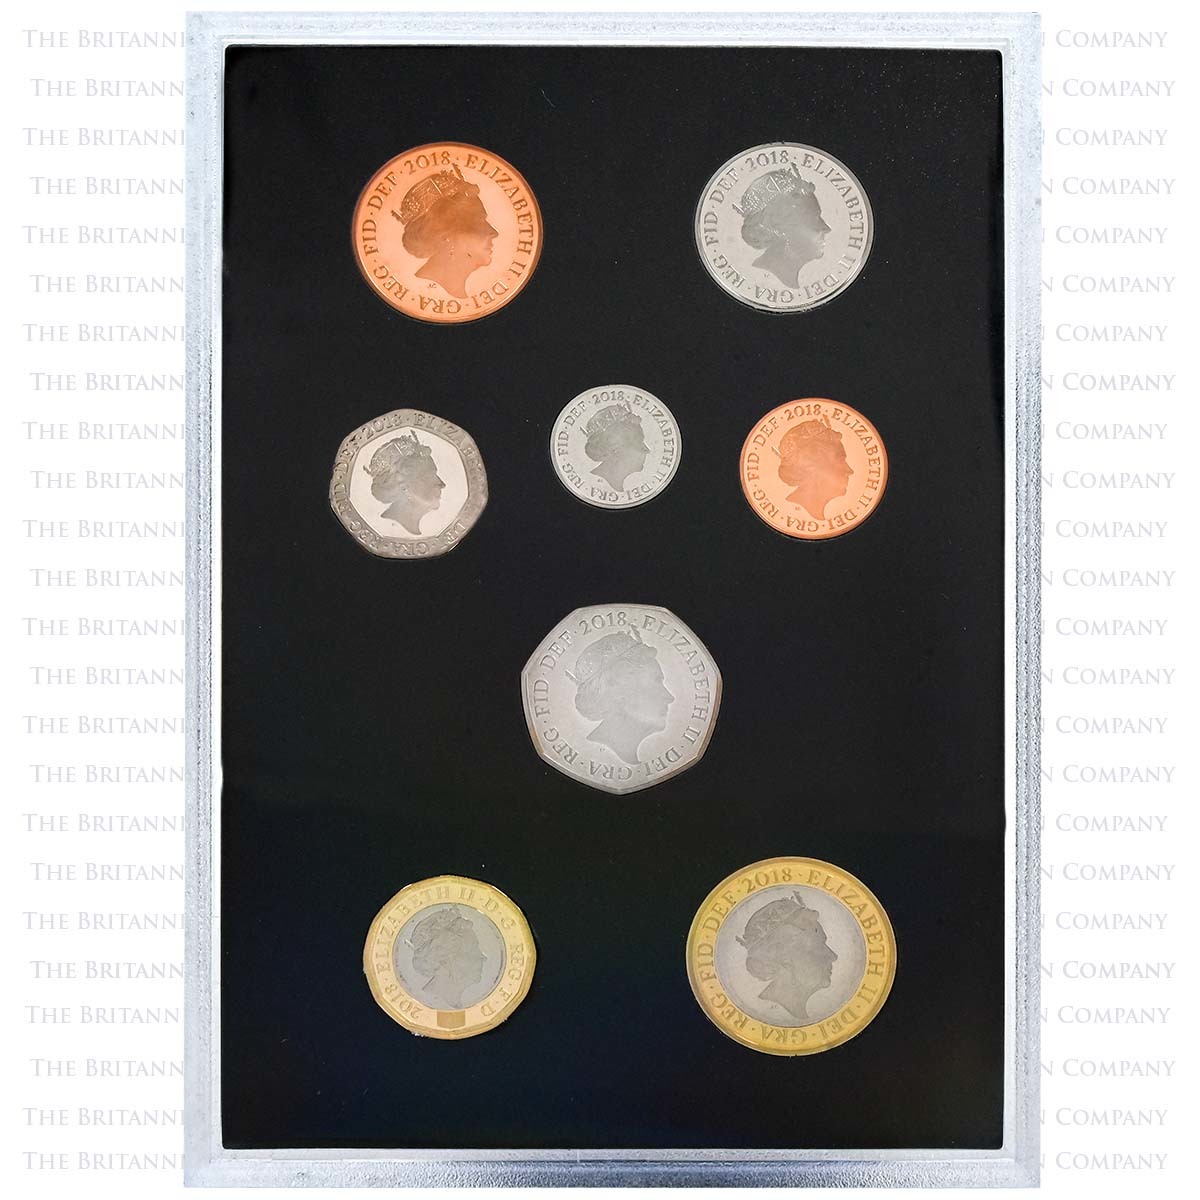 2018-proof-coin-set-collector-edtition-003-m